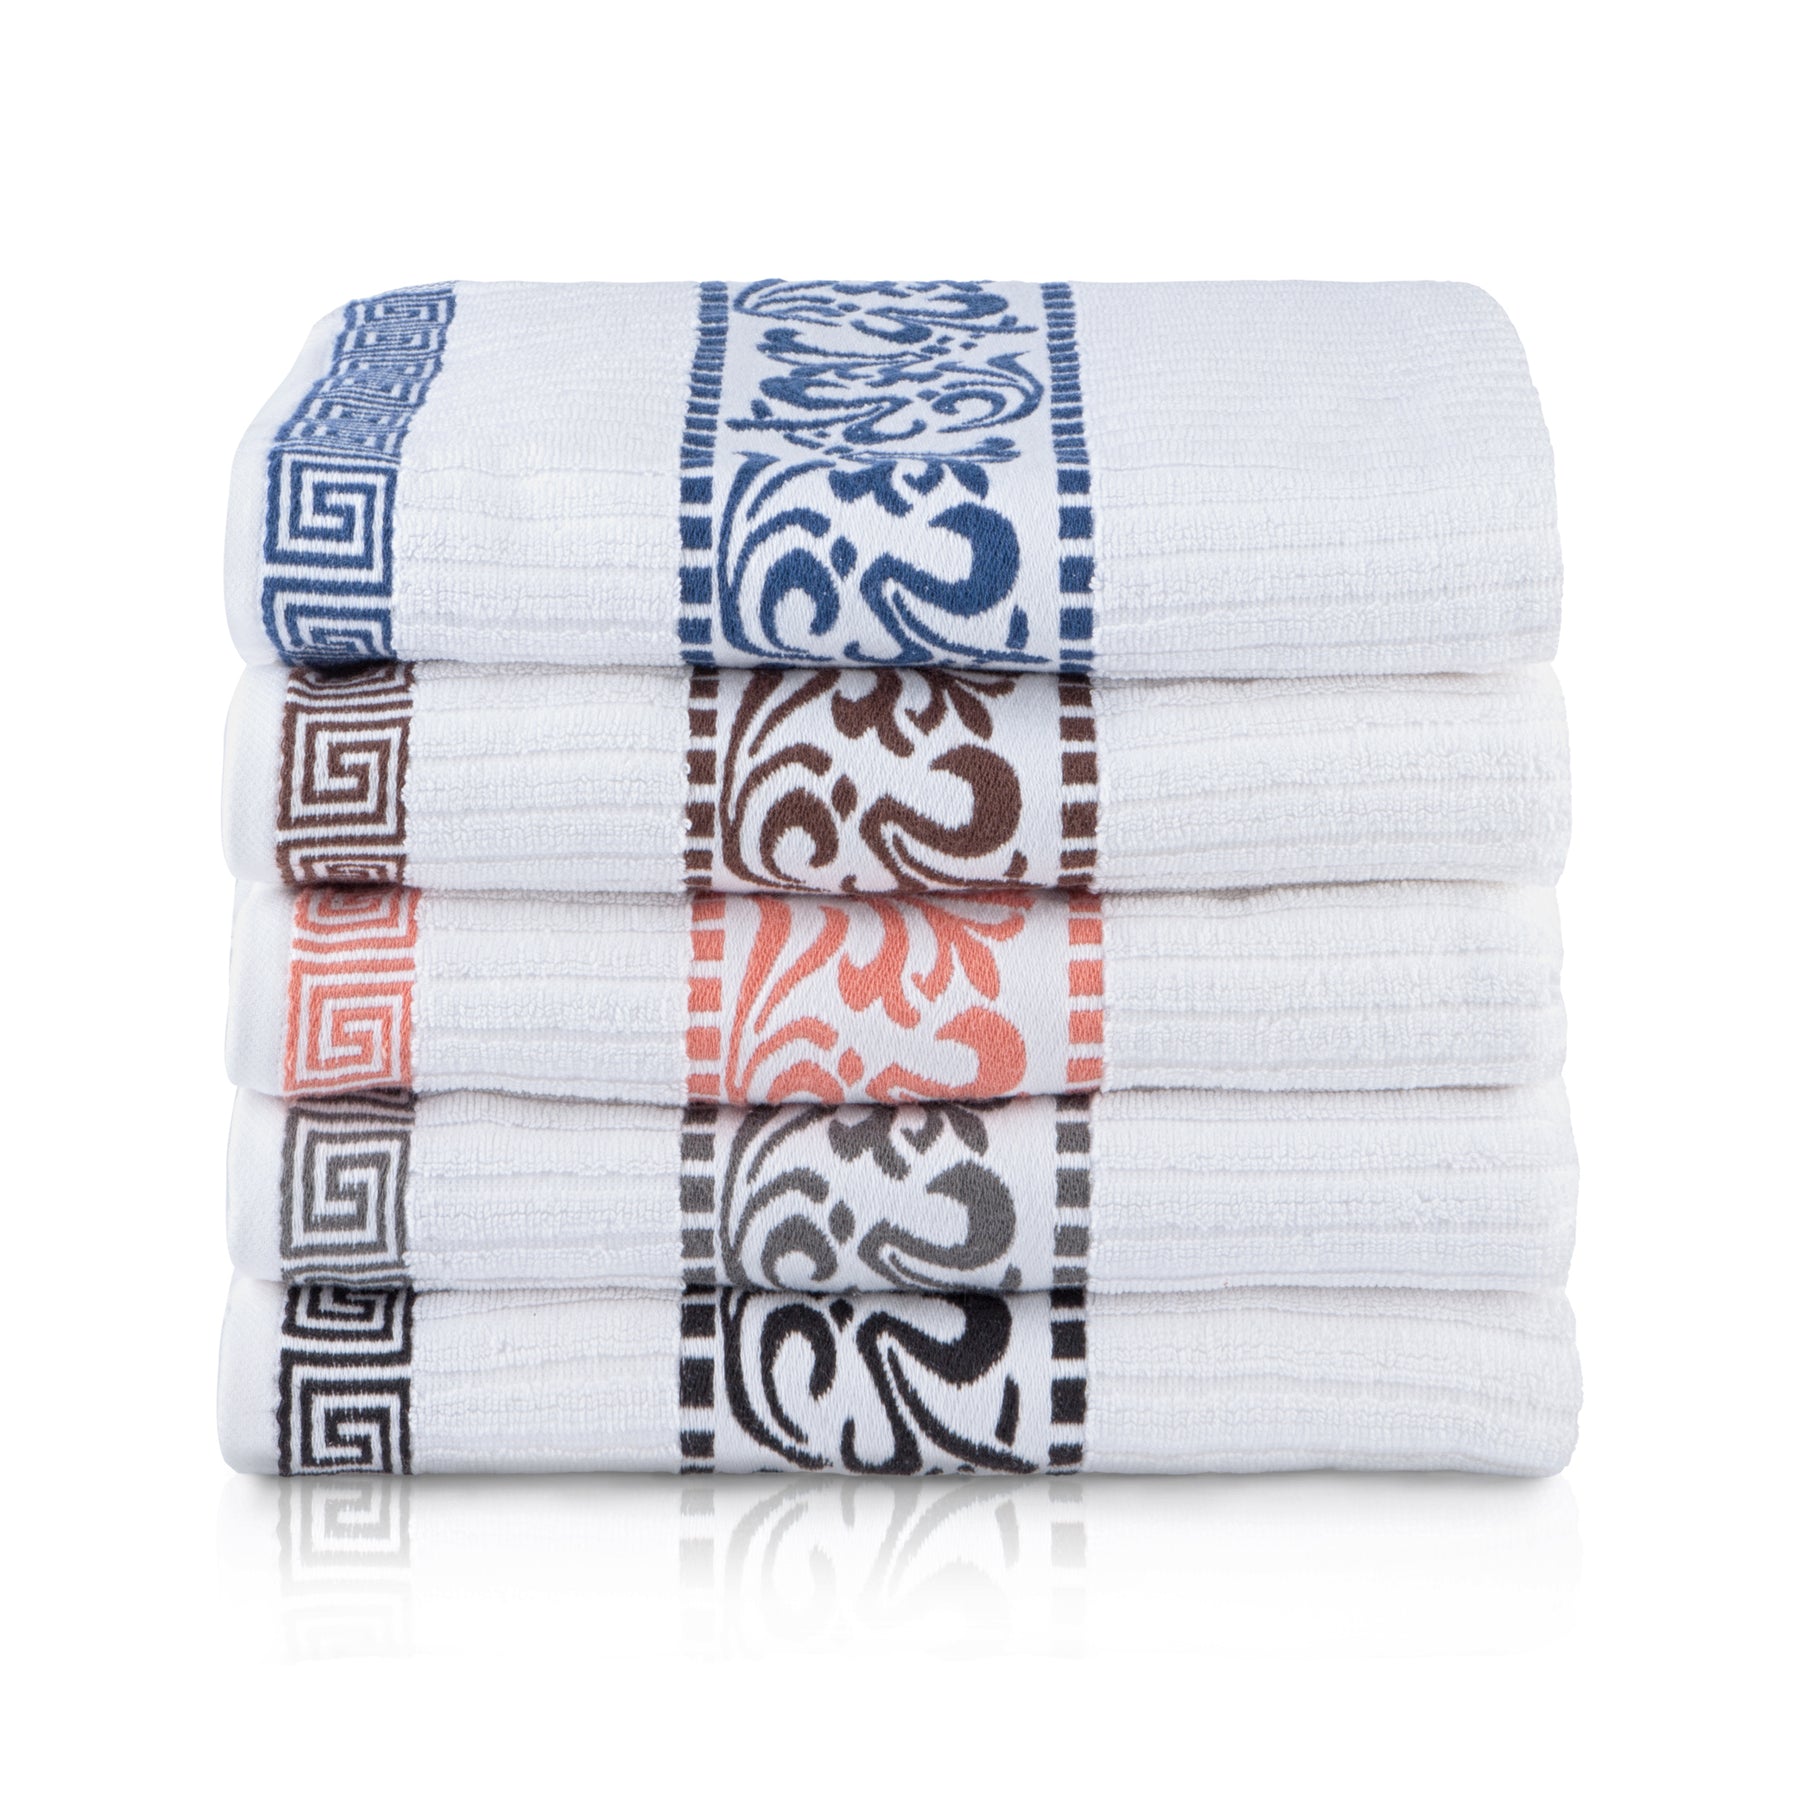 Superior Athens Cotton 8-Piece Towel Set with Greek Scroll and Floral Pattern